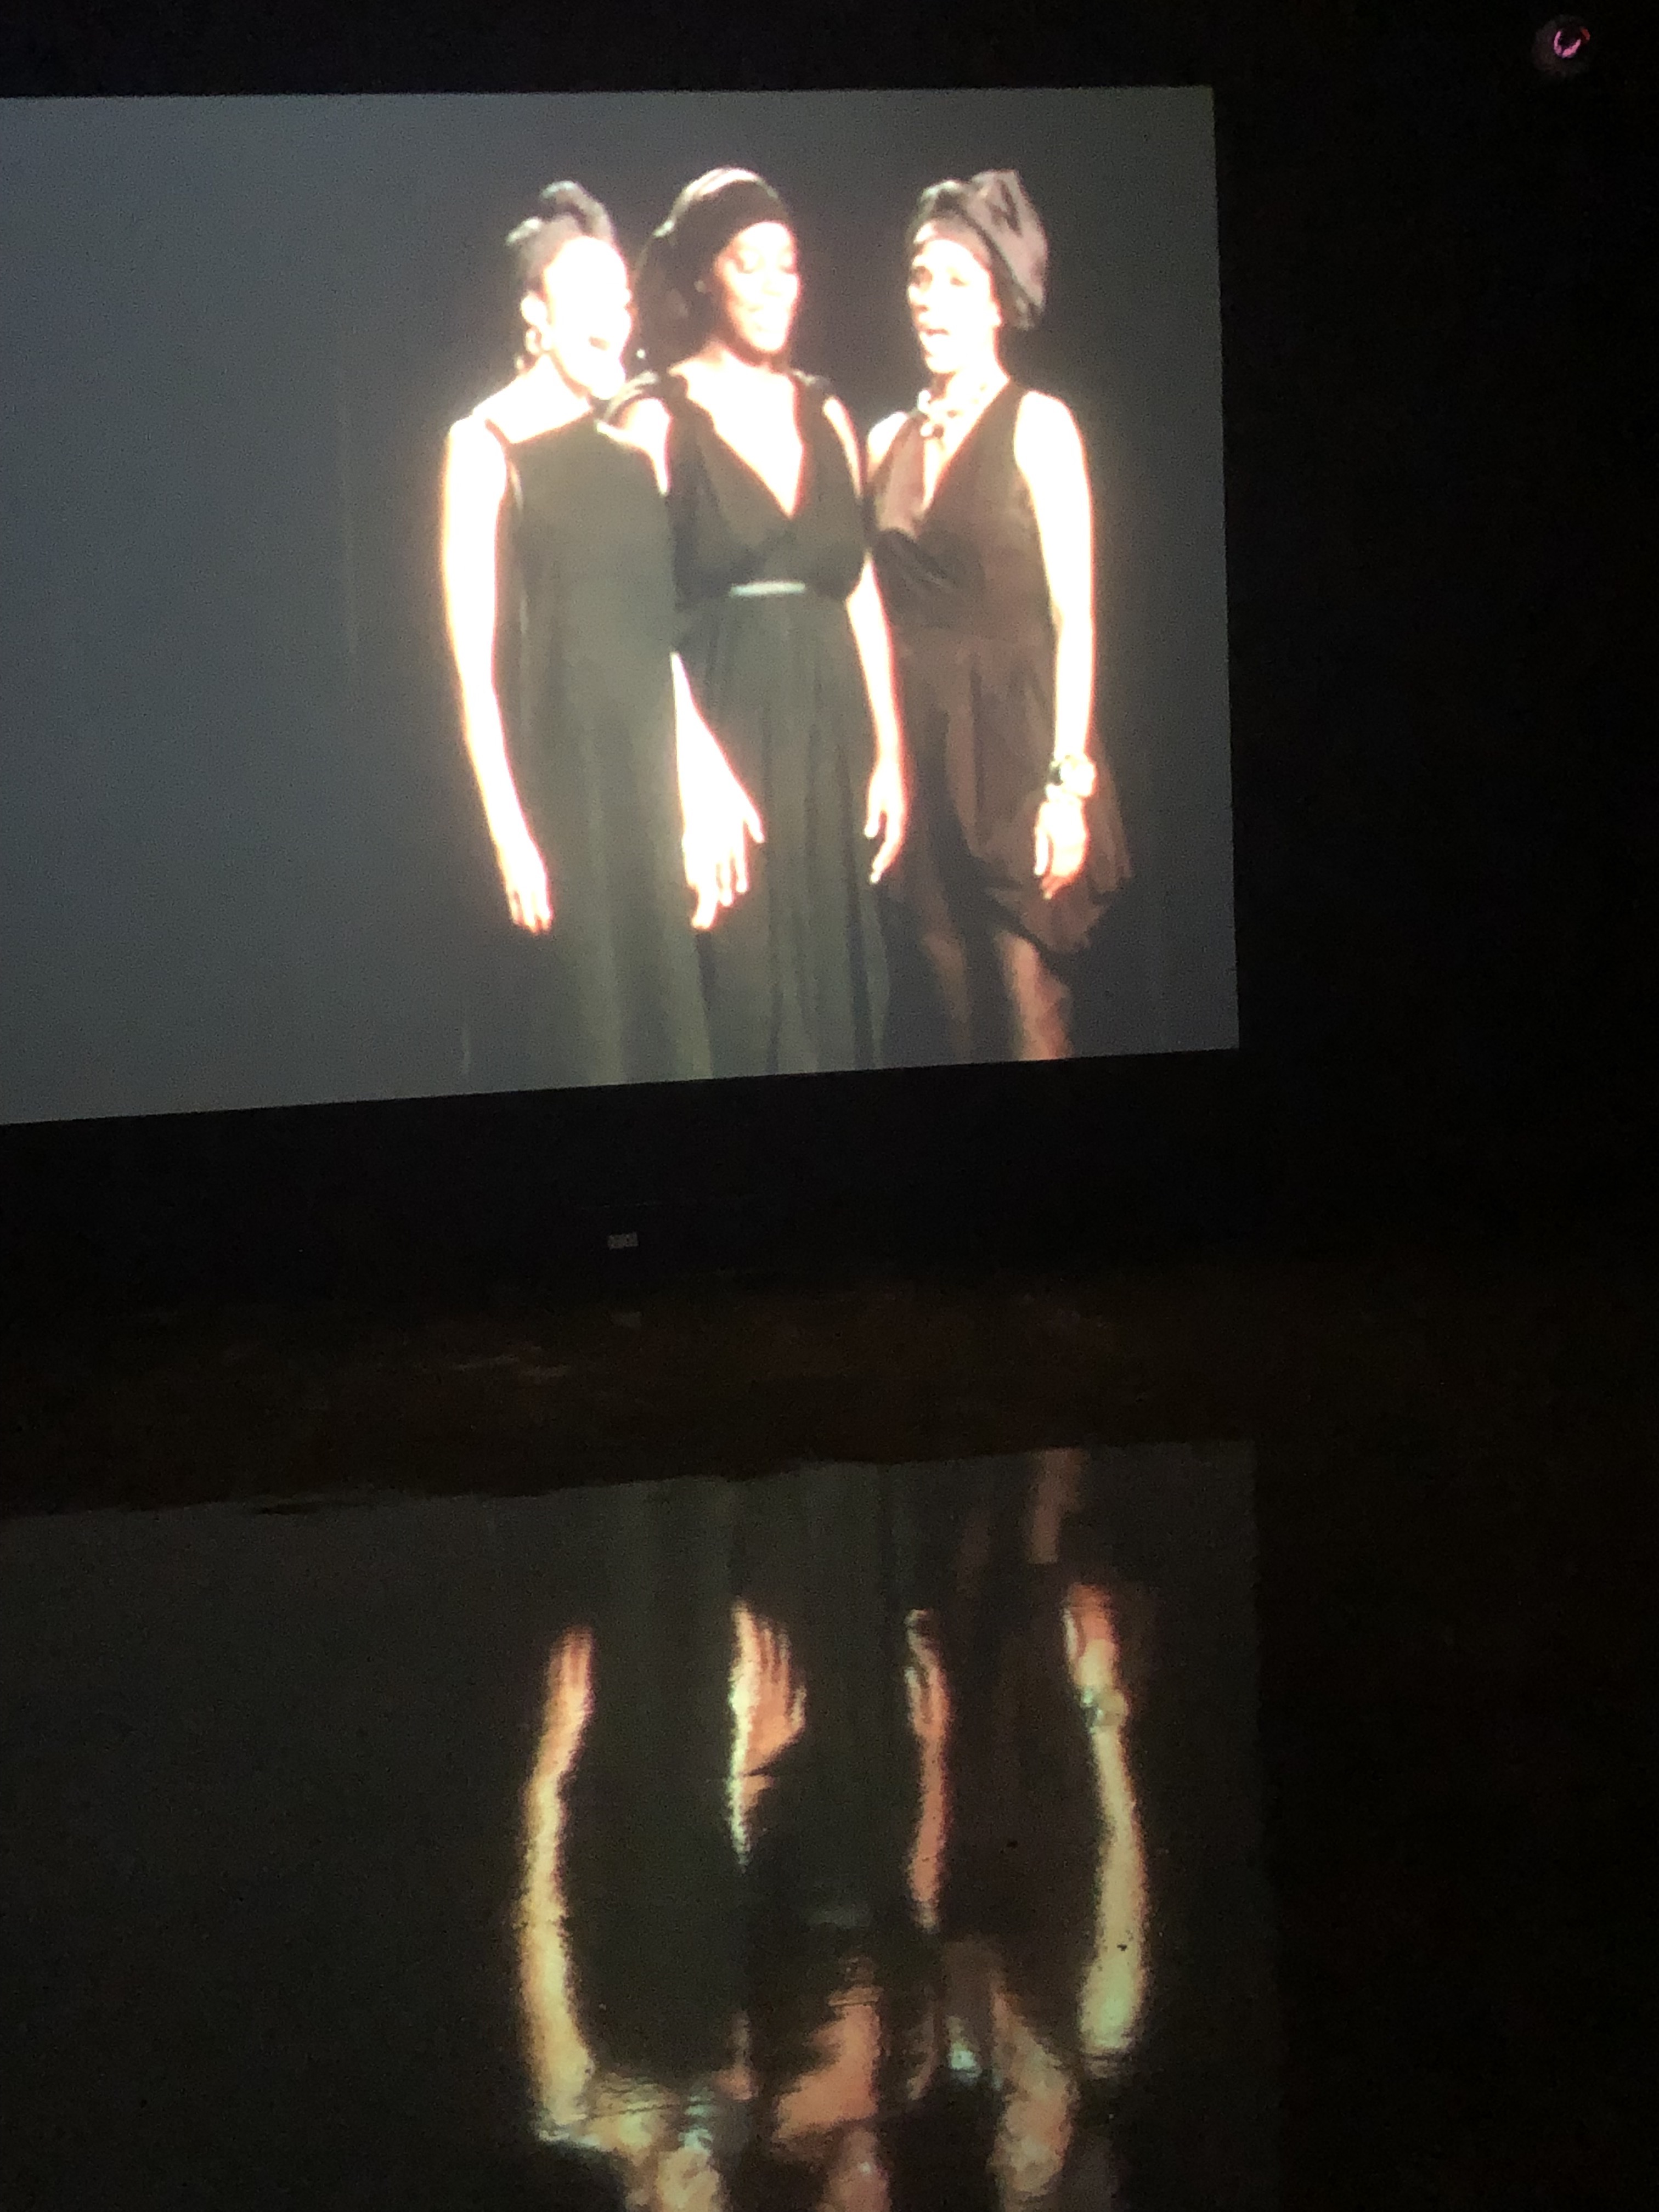 A scene from Carrie Mae Weemsâ€™ film in which three Black women are singing in harmony in elegant black dresses against a stark black backdrop. Photo by Amy Penne.